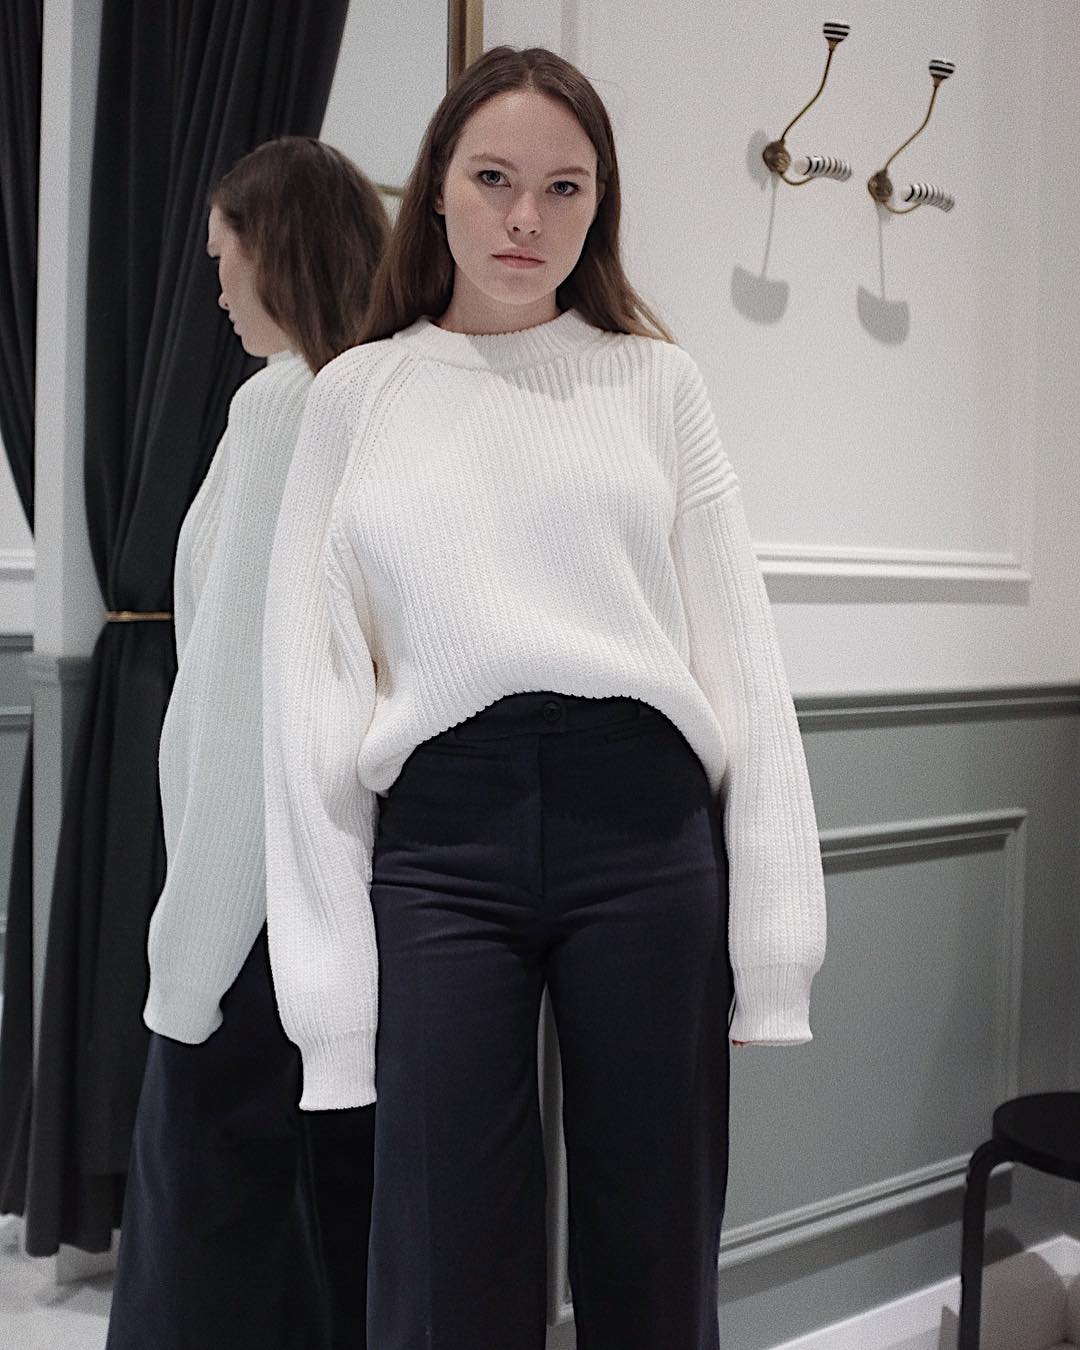 Chloe's Cool Look In White Sweater Paired With Black Pants